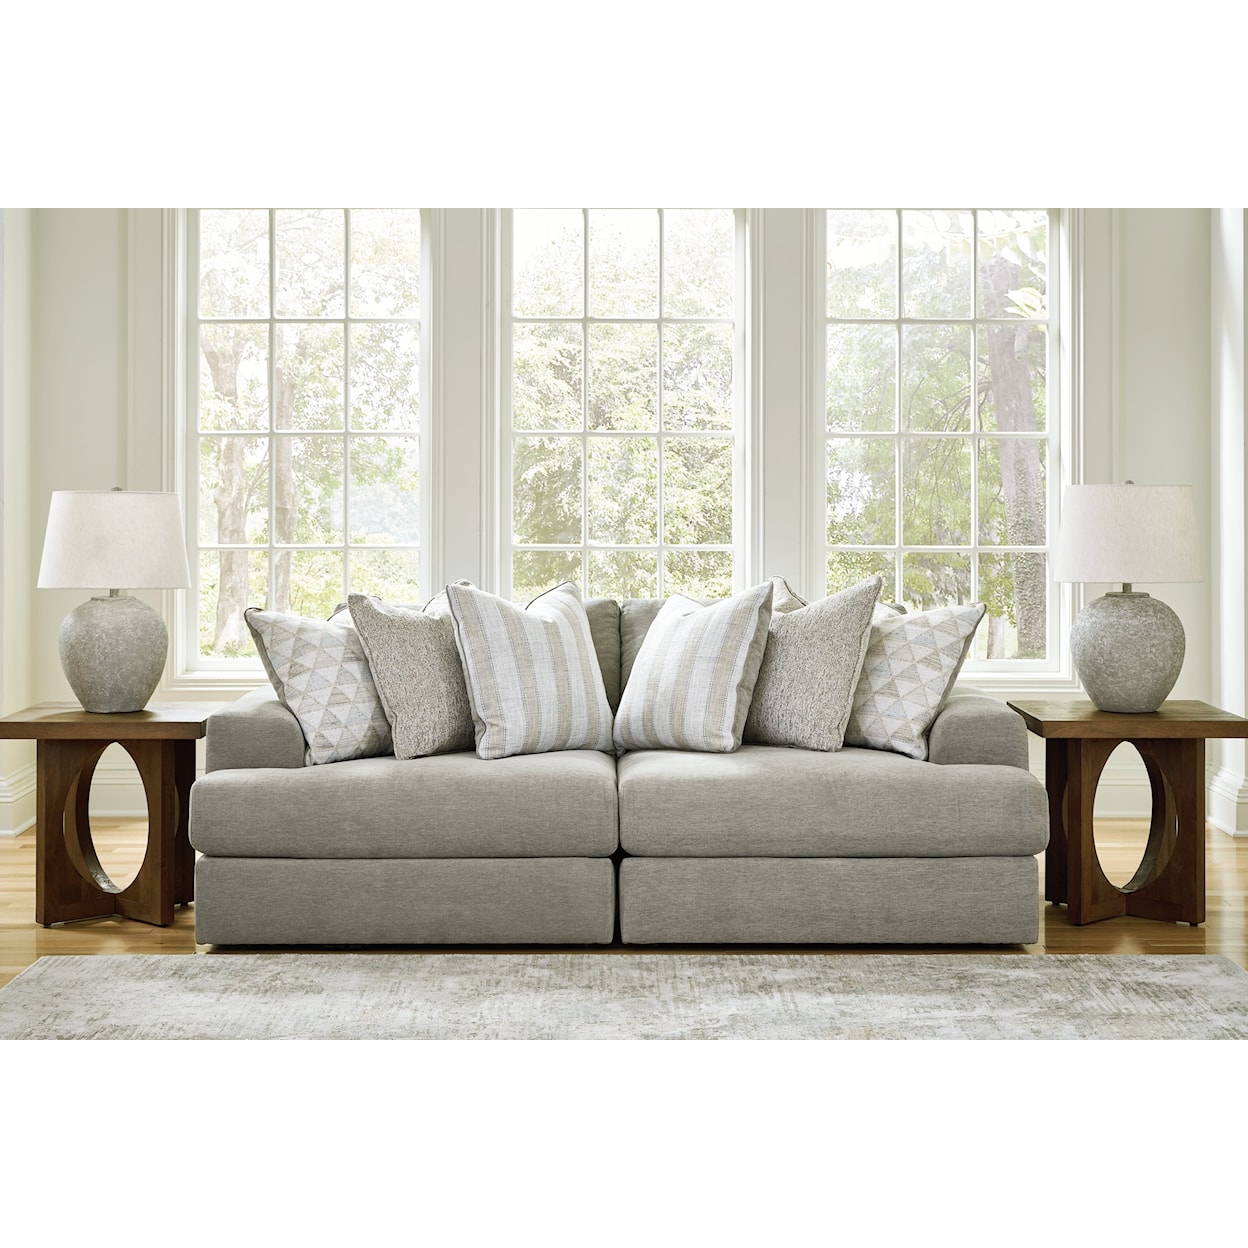 Signature Design by Ashley Furniture Avaliyah 2-Piece Sectional